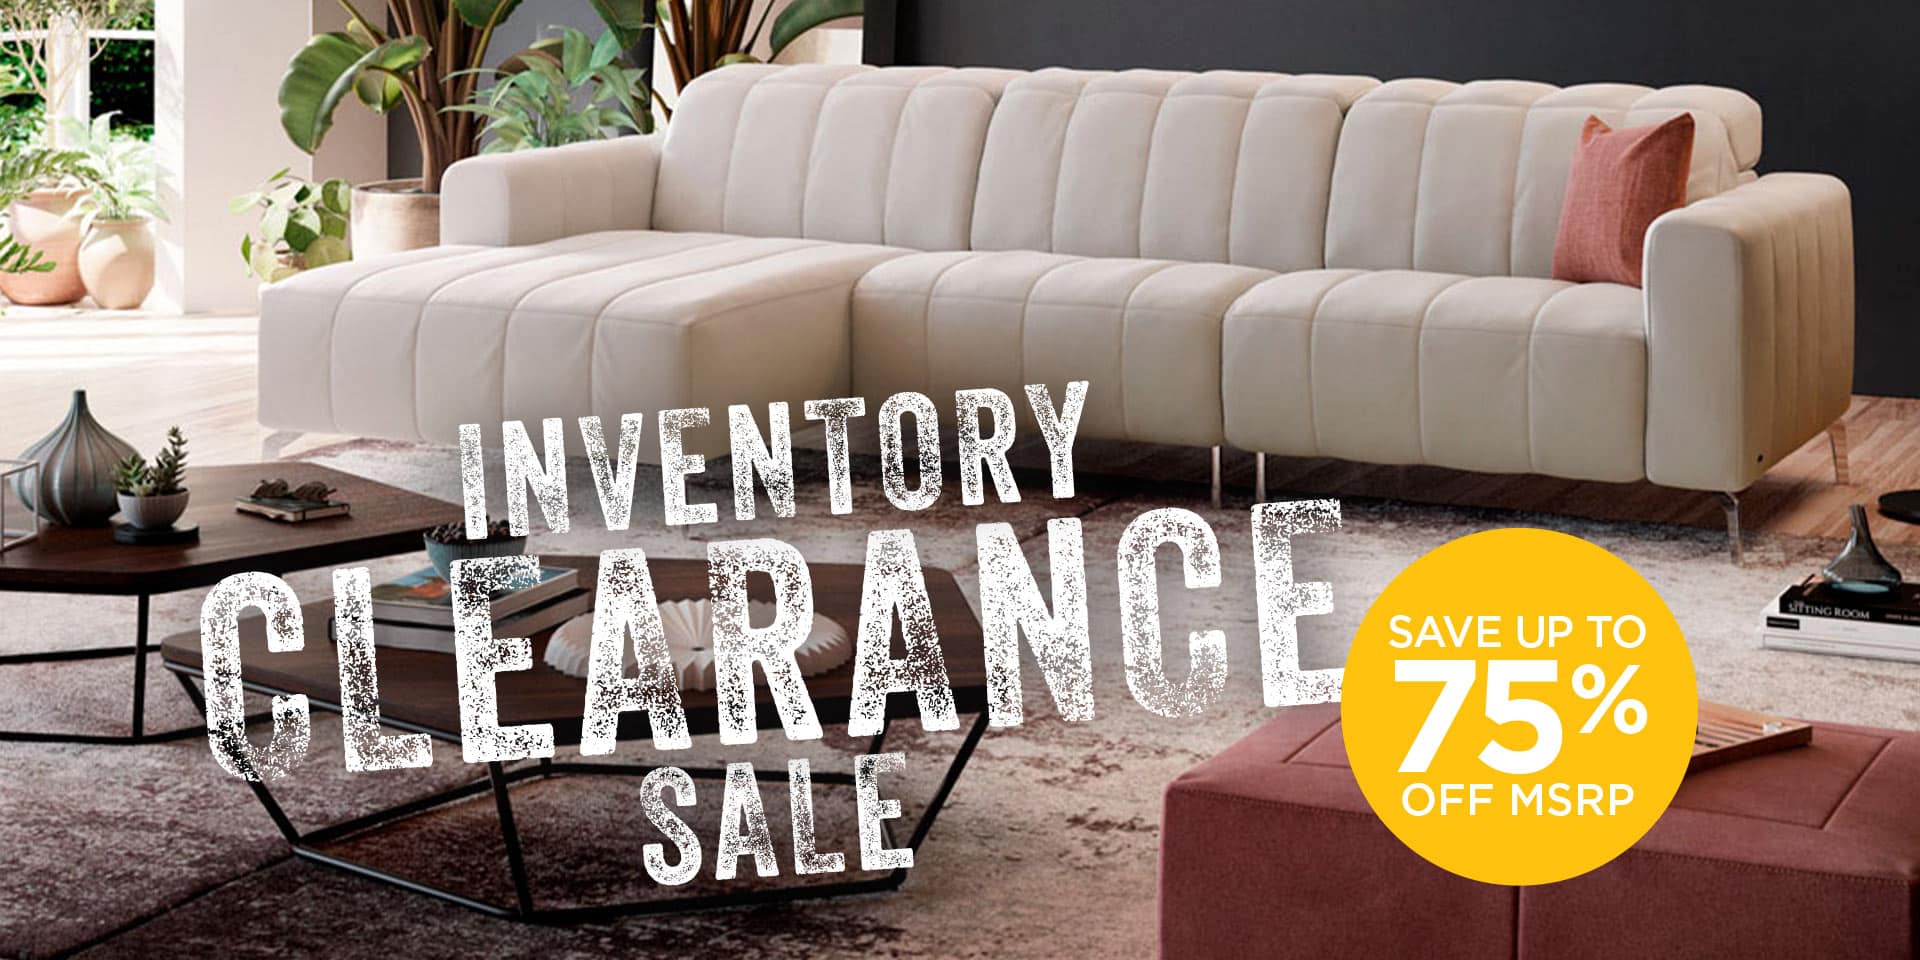 Inventory Clearance Sale - Save Up To 75% Off MSRP